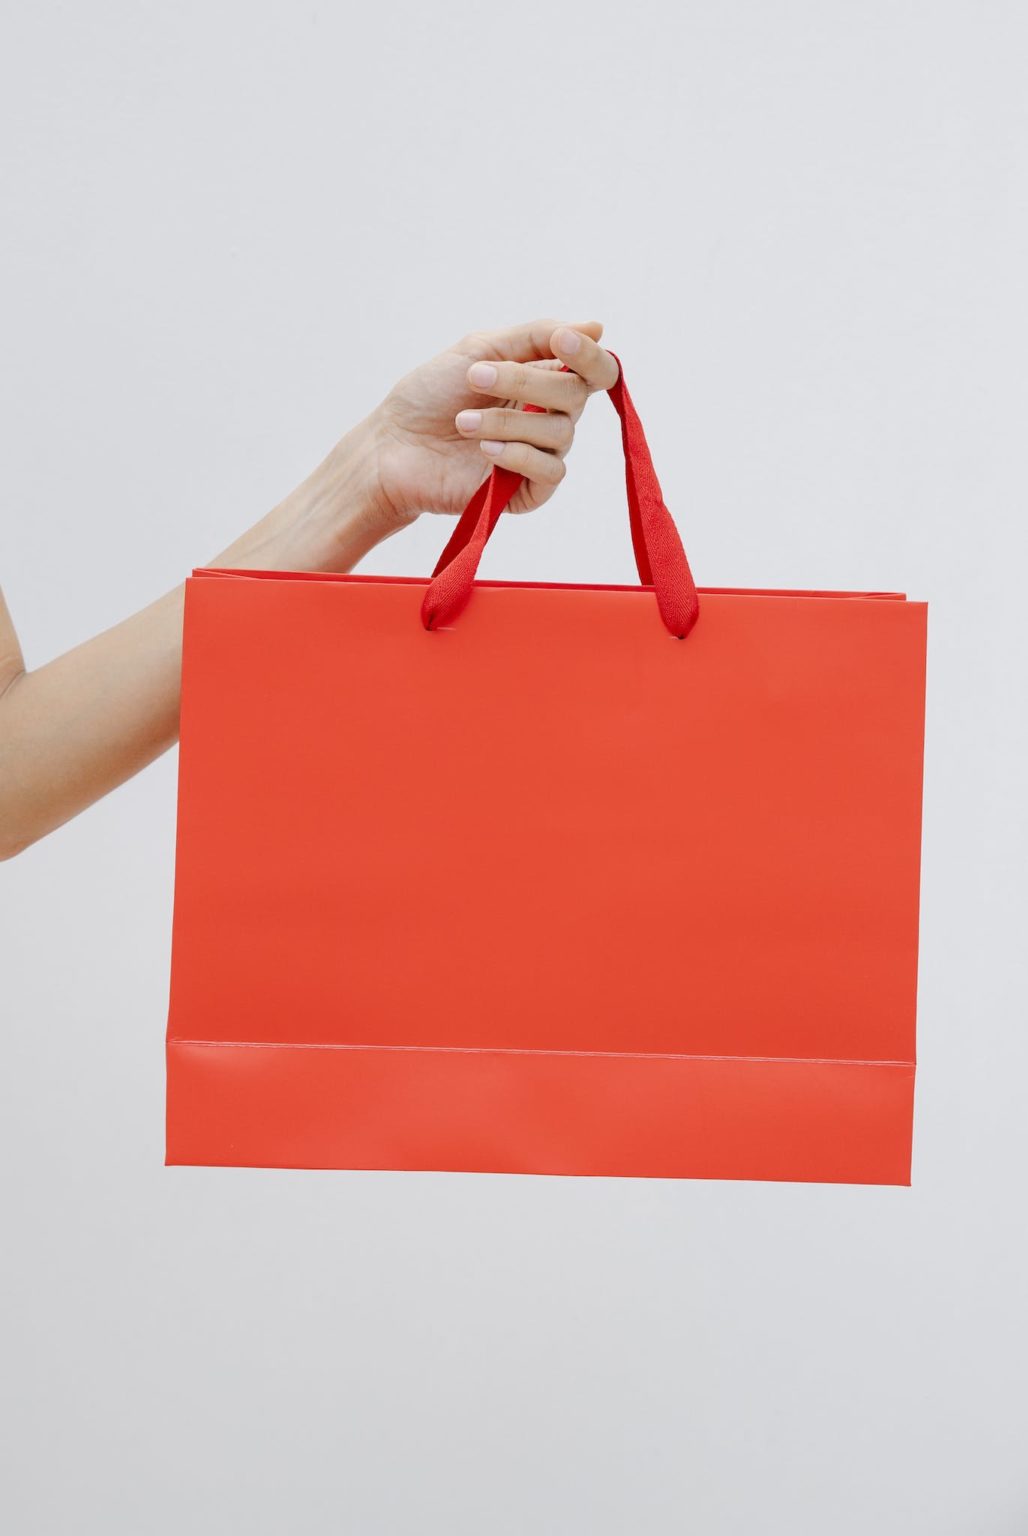 Crop unrecognizable female showing red paper shopping bag in hand against white wall